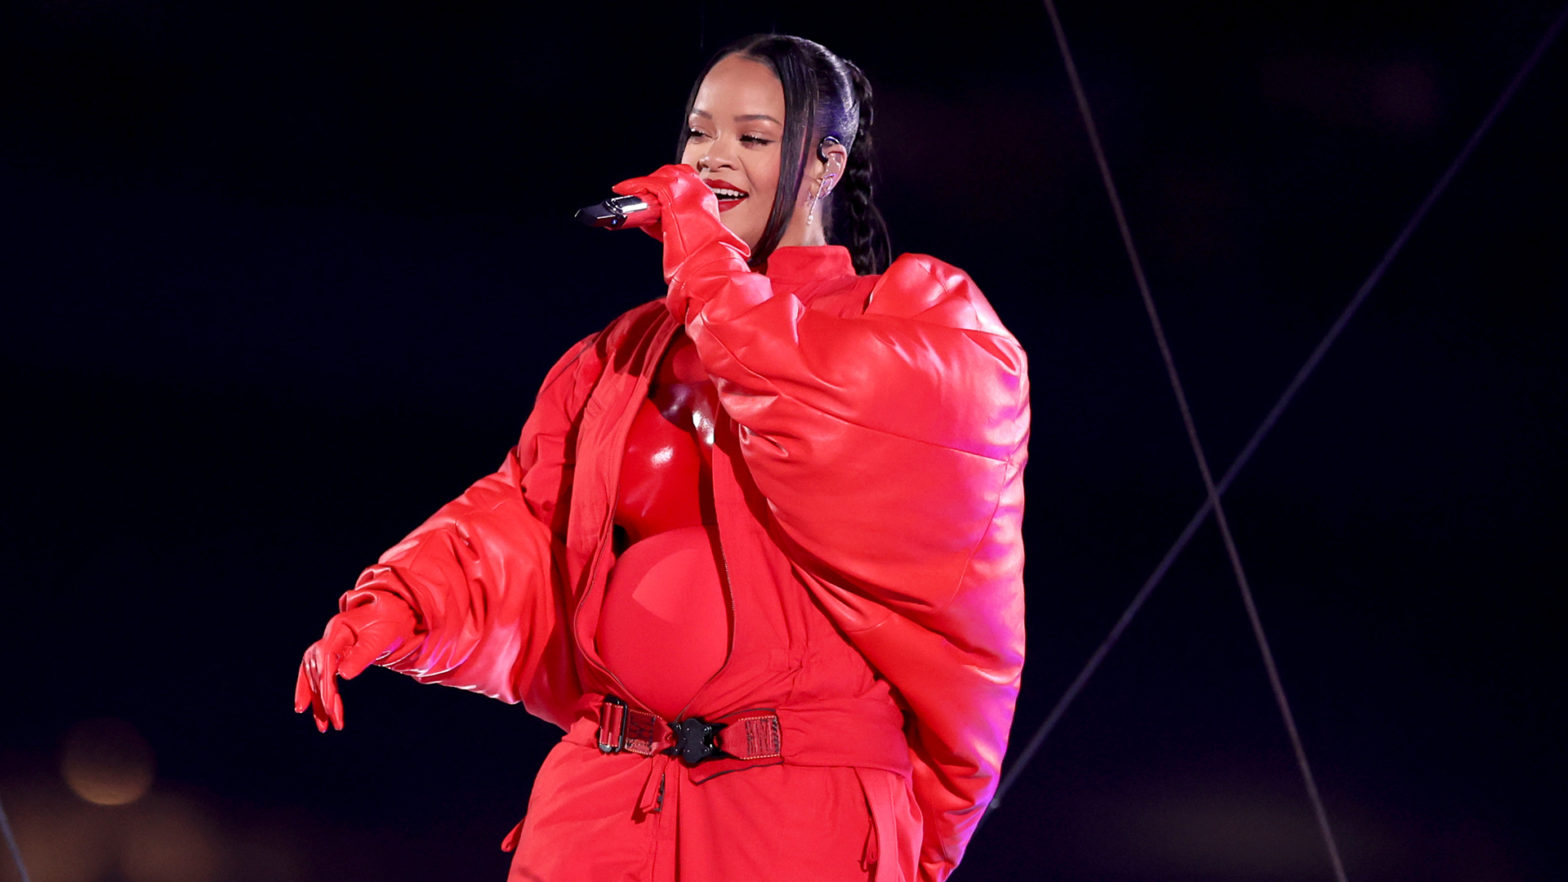 Various Hits By Rihanna Surge Over 1,000 Percent In U.S. Streams After Super Bowl Halftime Performance